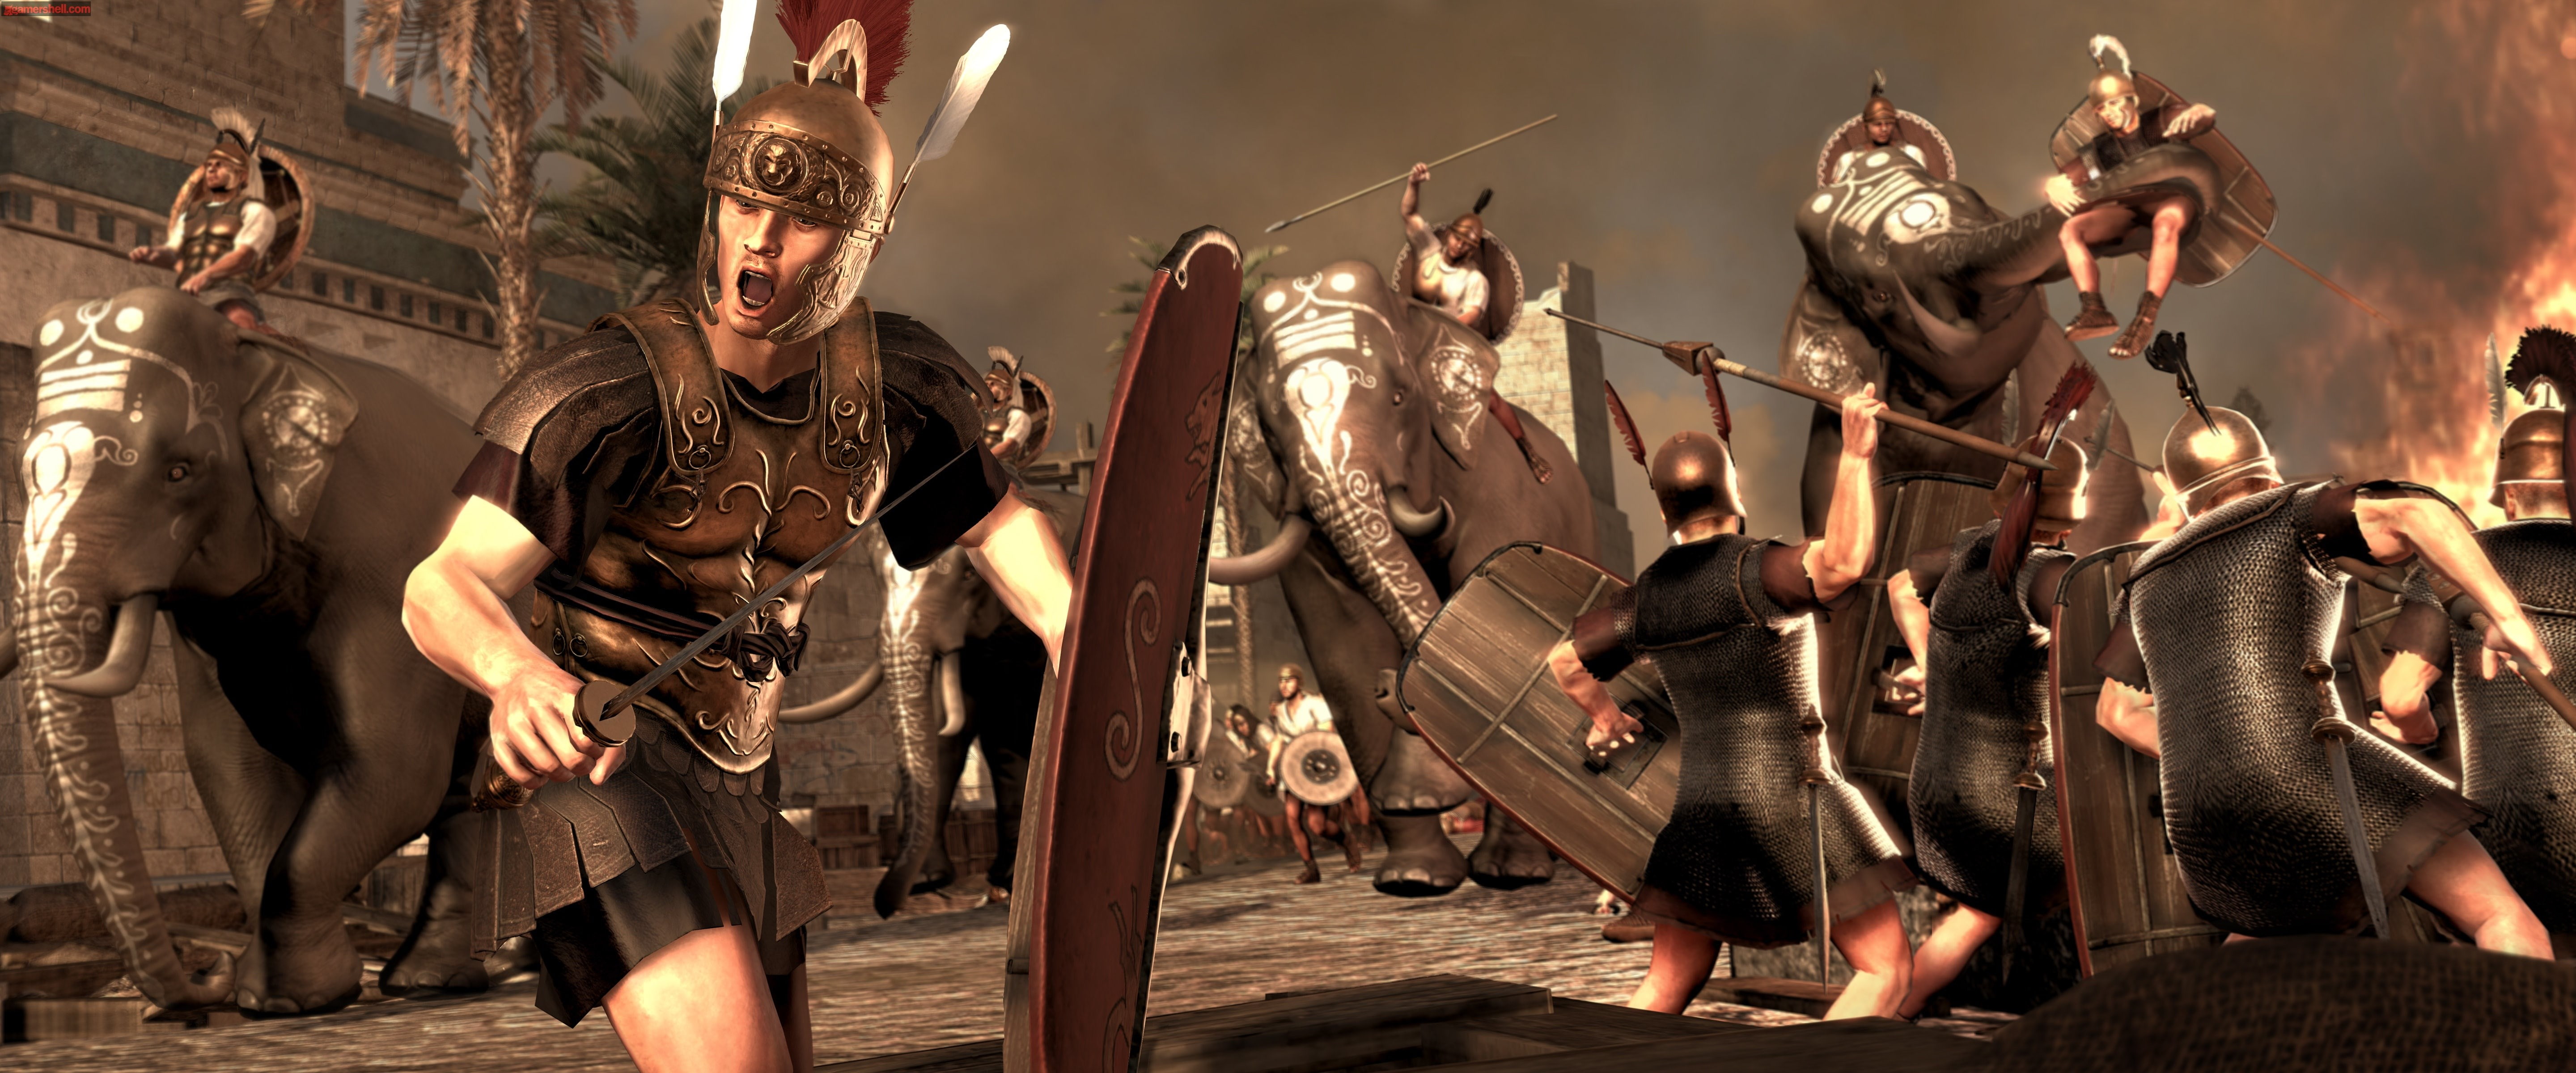 total war rome ii, art and craft, architecture, human representation